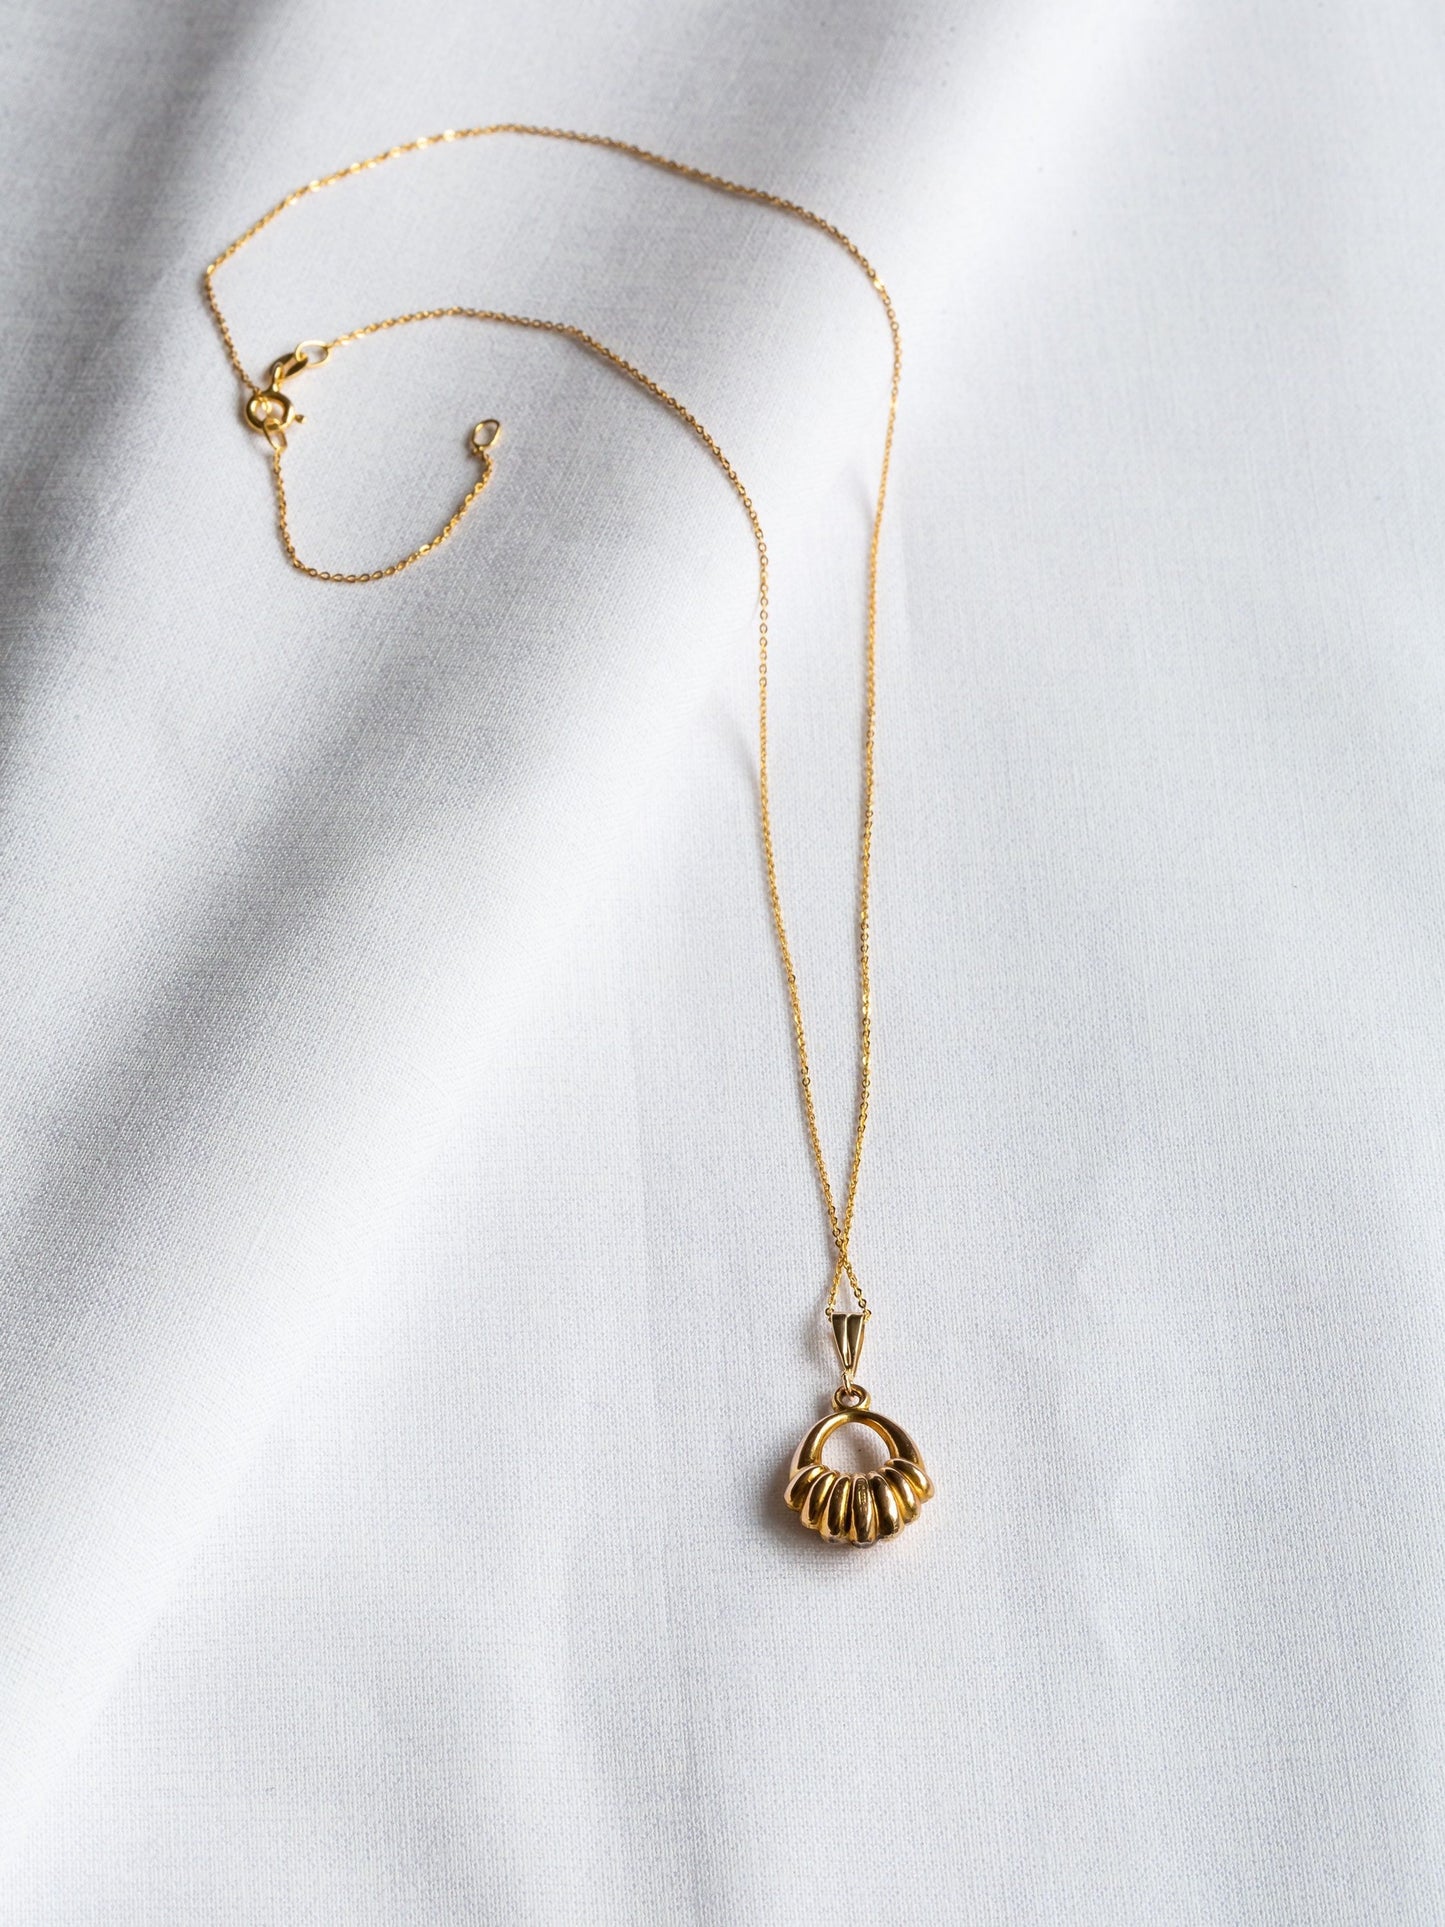 Vintage 9ct Gold Puffy Pendant Necklace